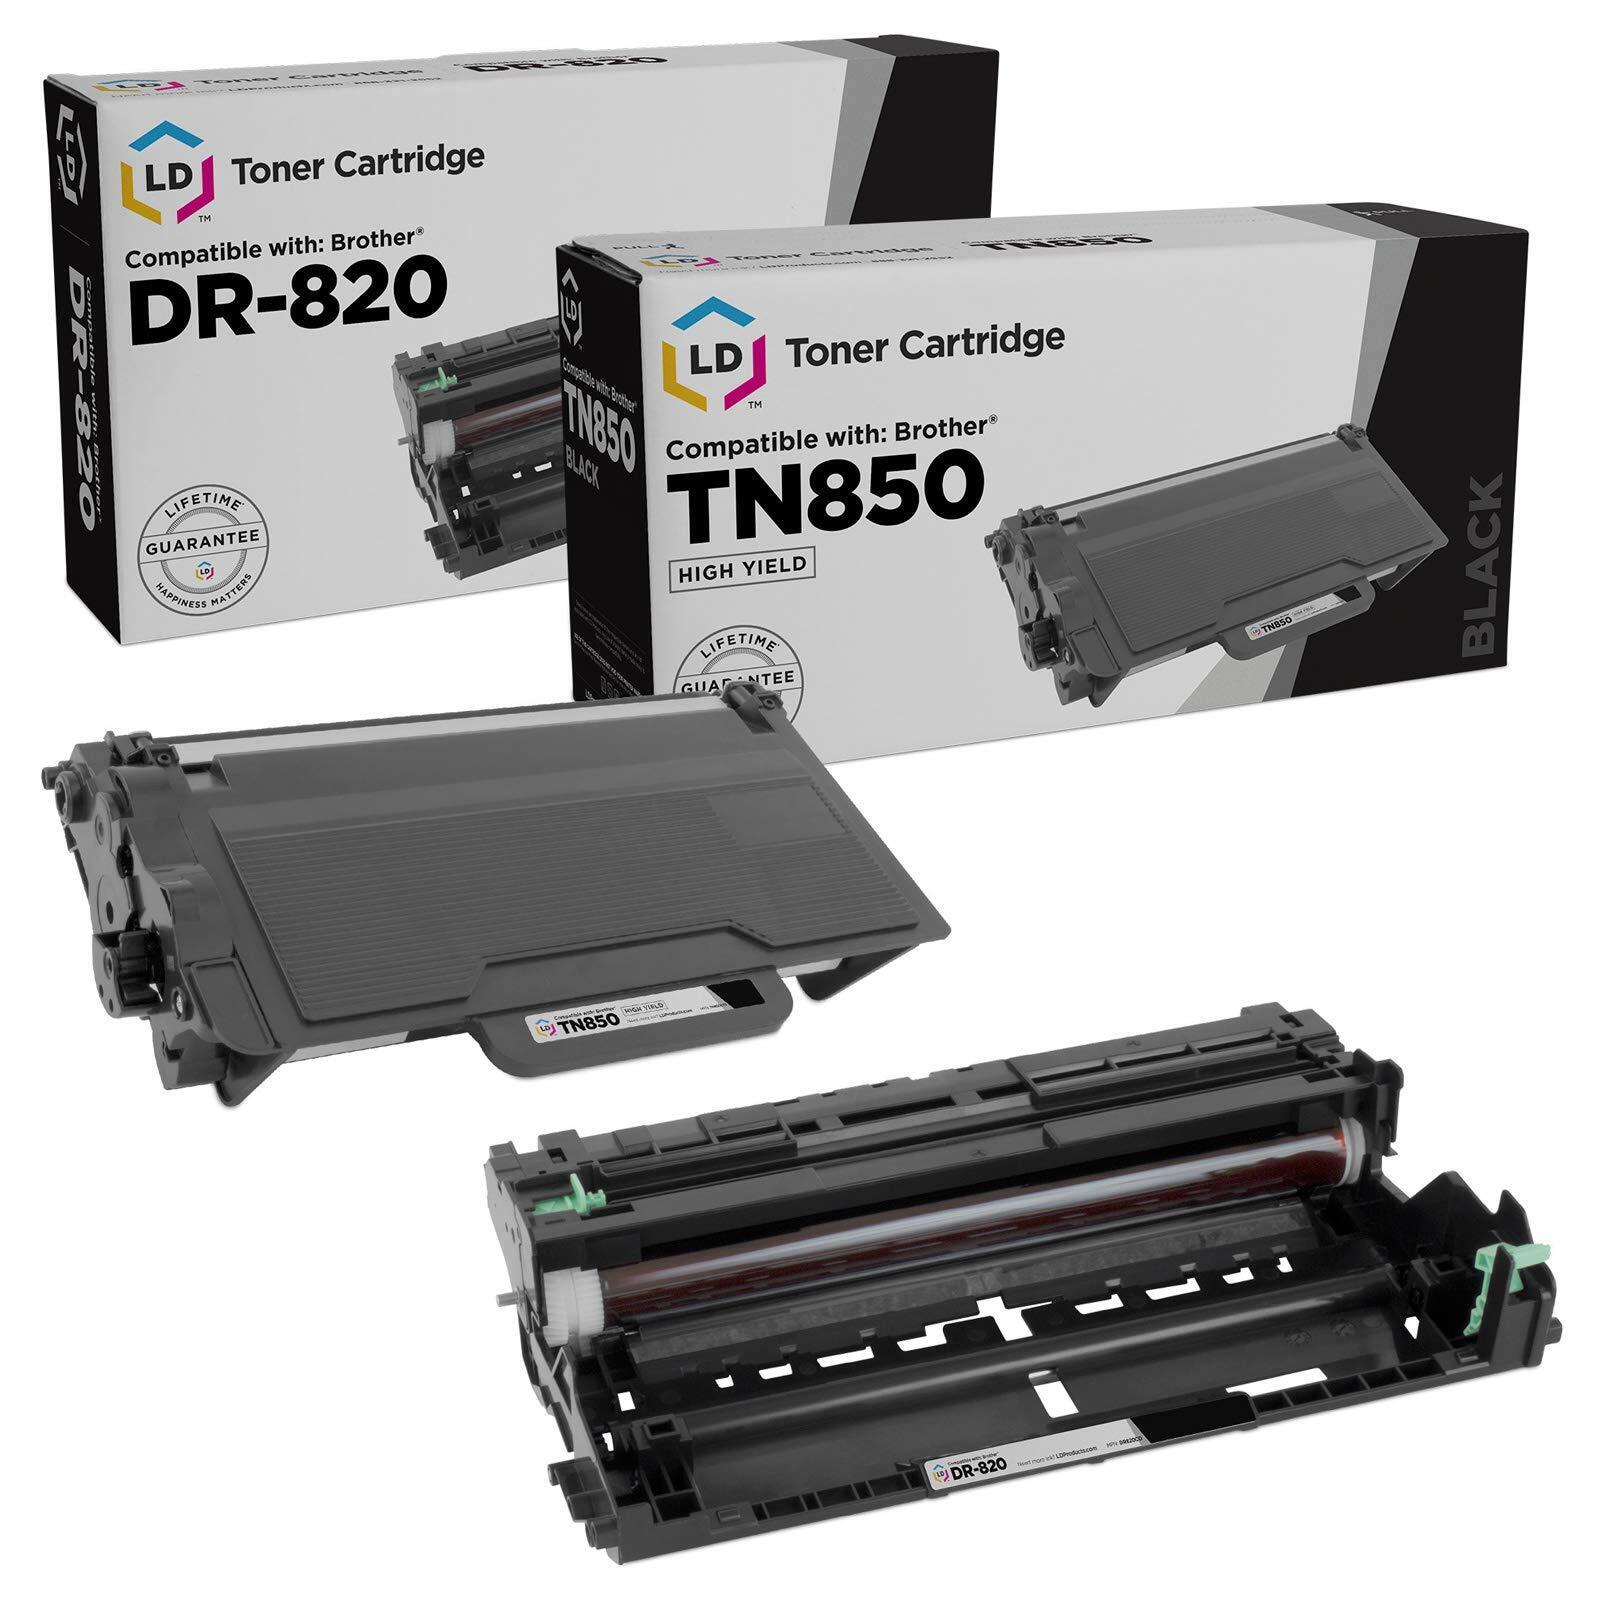 LD Compatible Brother TN850/DR820 Toner & Drum Unit 2PK for HL, DCP & MFC Series